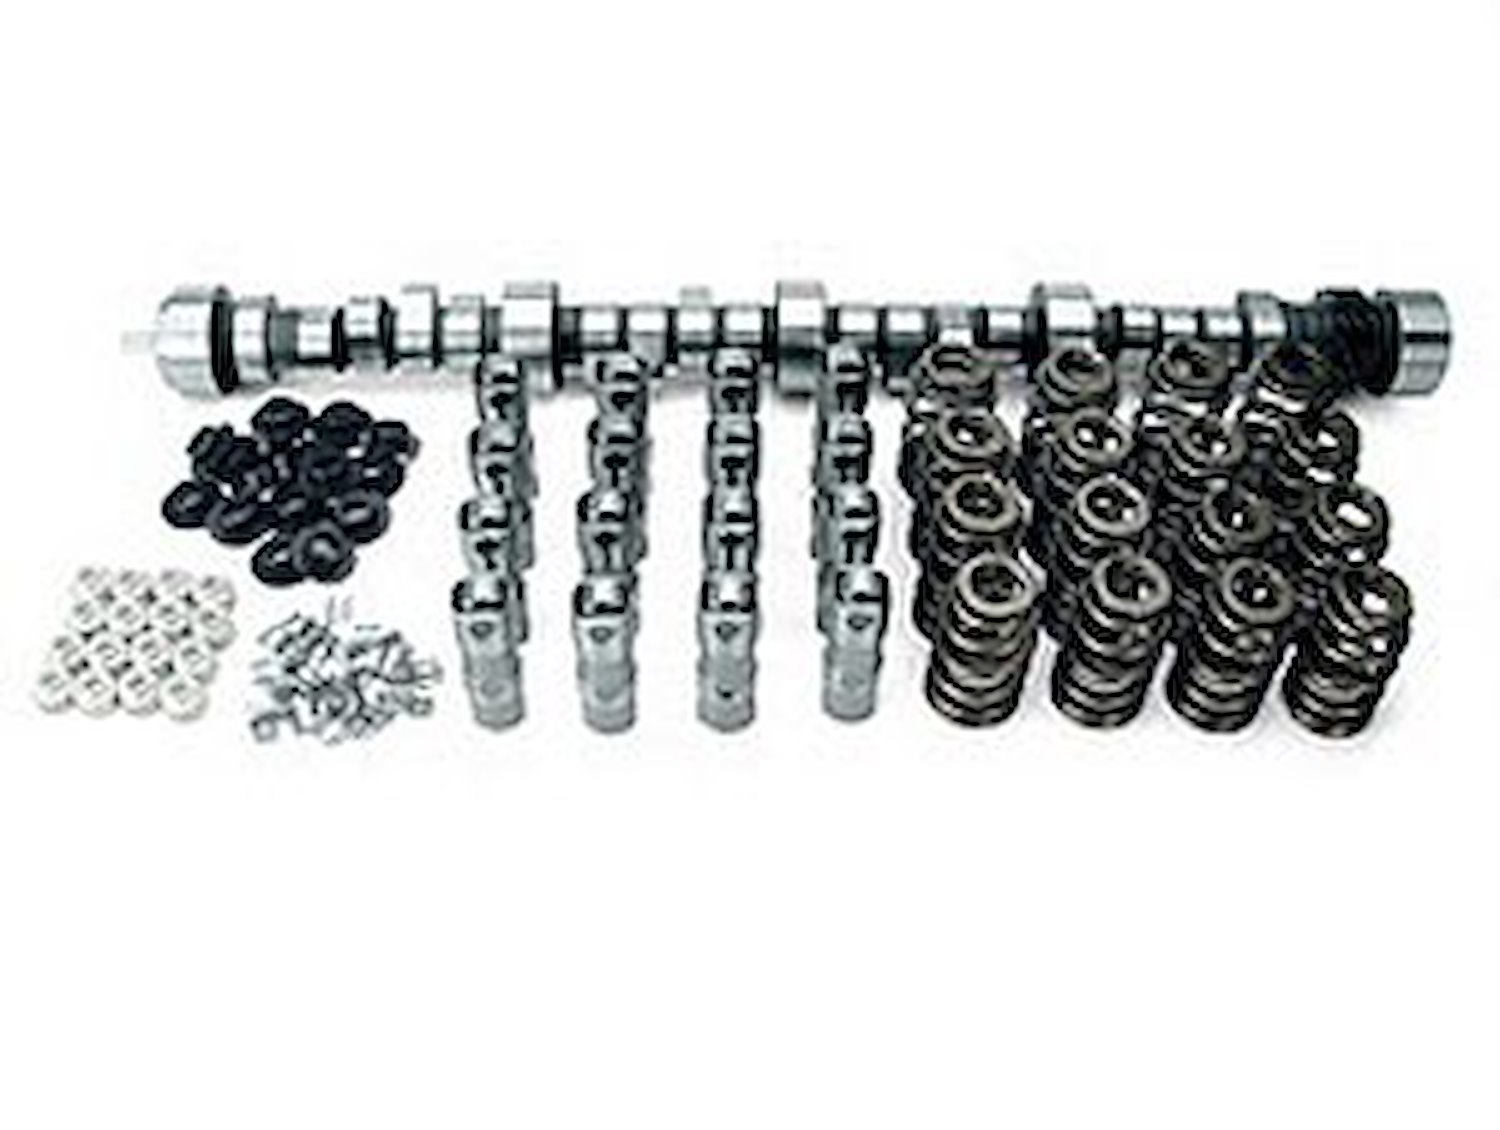 XFI Hydraulic Roller Camshaft Complete Kit Small Block Chevy 305/350 1987-95 Lift: .576"/.570" With 1.6 Rockers